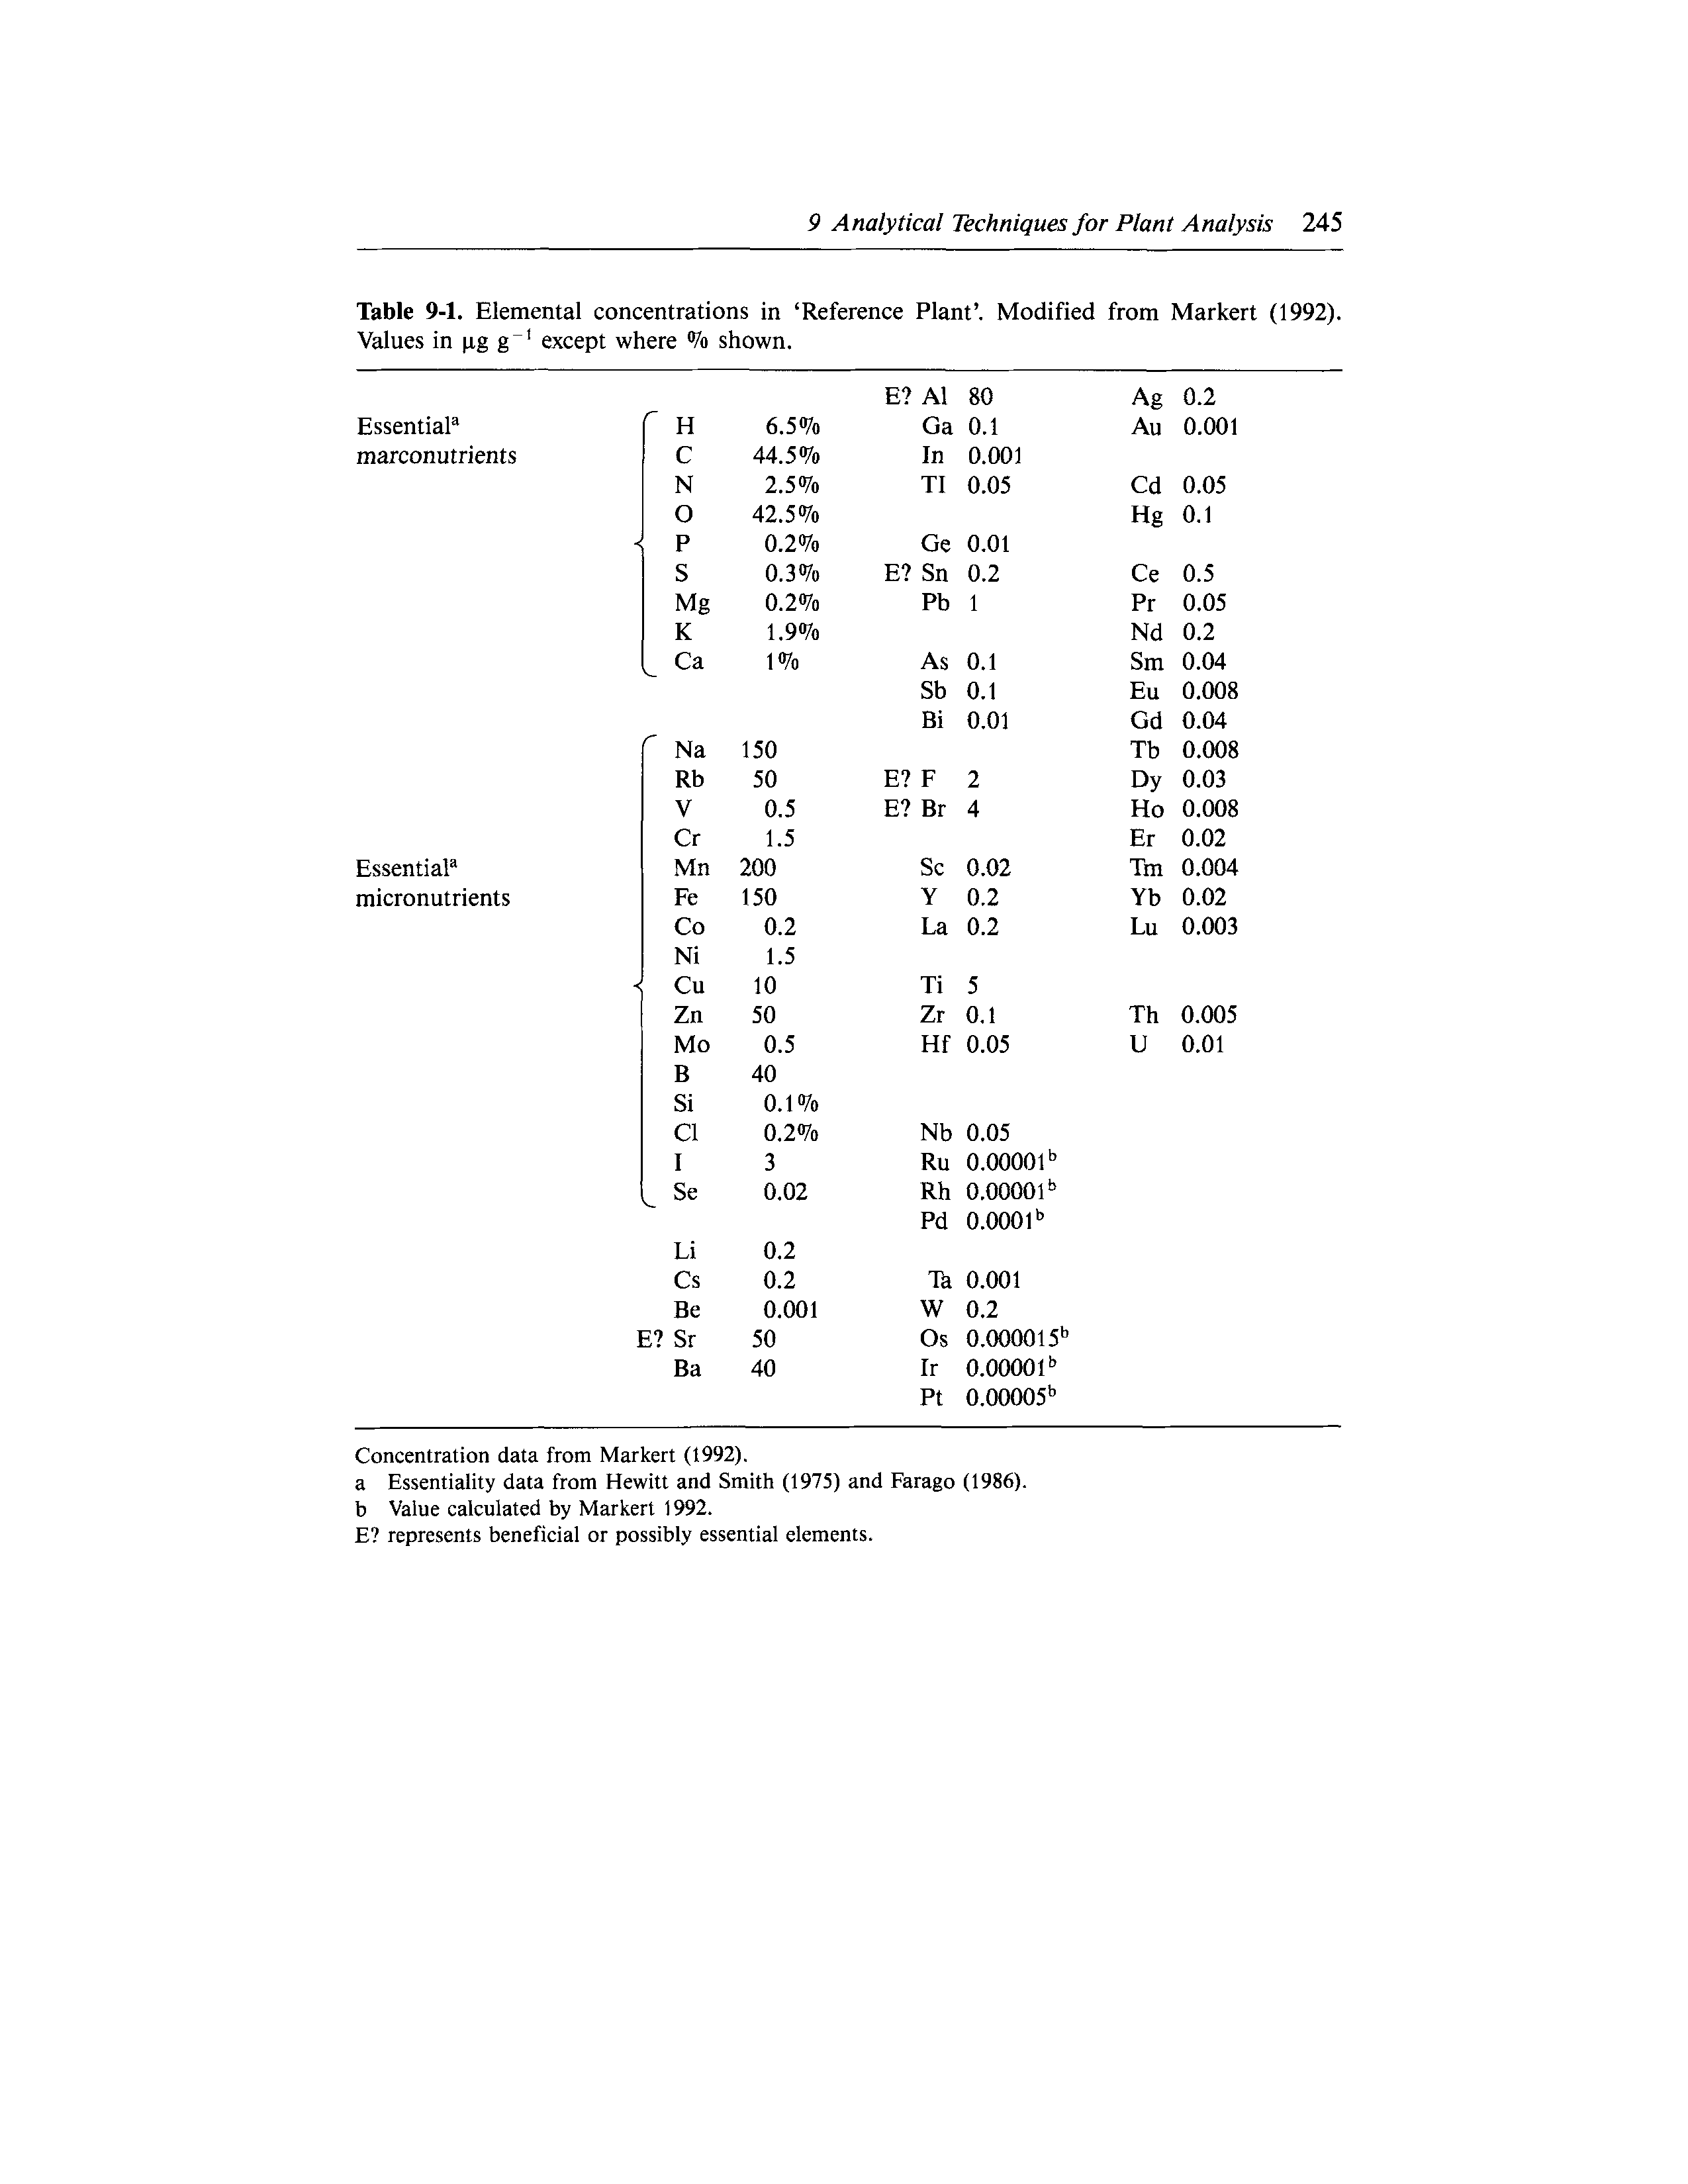 Table 9-1. Elemental concentrations in Reference Plant . Modified from Markert (1992). Values in pg g 1 except where % shown.